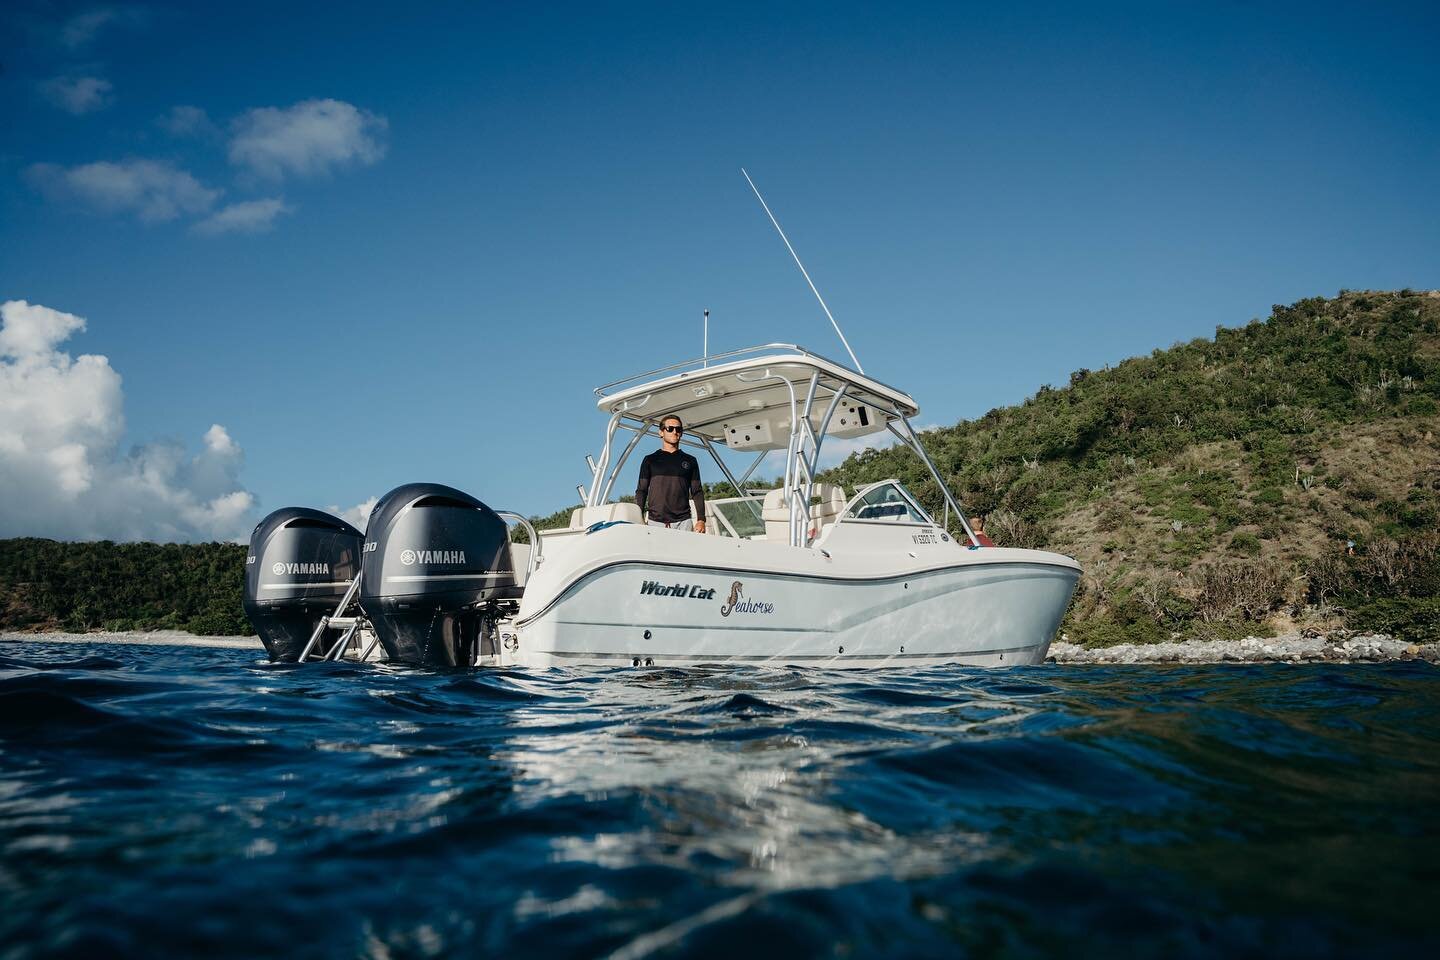 Just another day in the office. 

📷 @sarahbswan 

#charter #charterboat #vacation #usvi #vi #bvi #stjohn #stthomas #visitusvi #vacationgoals #passionpassport #caribbean #caribbeanvacation #boating #worldcat #virginislands #yamahaoutboards #explore-m